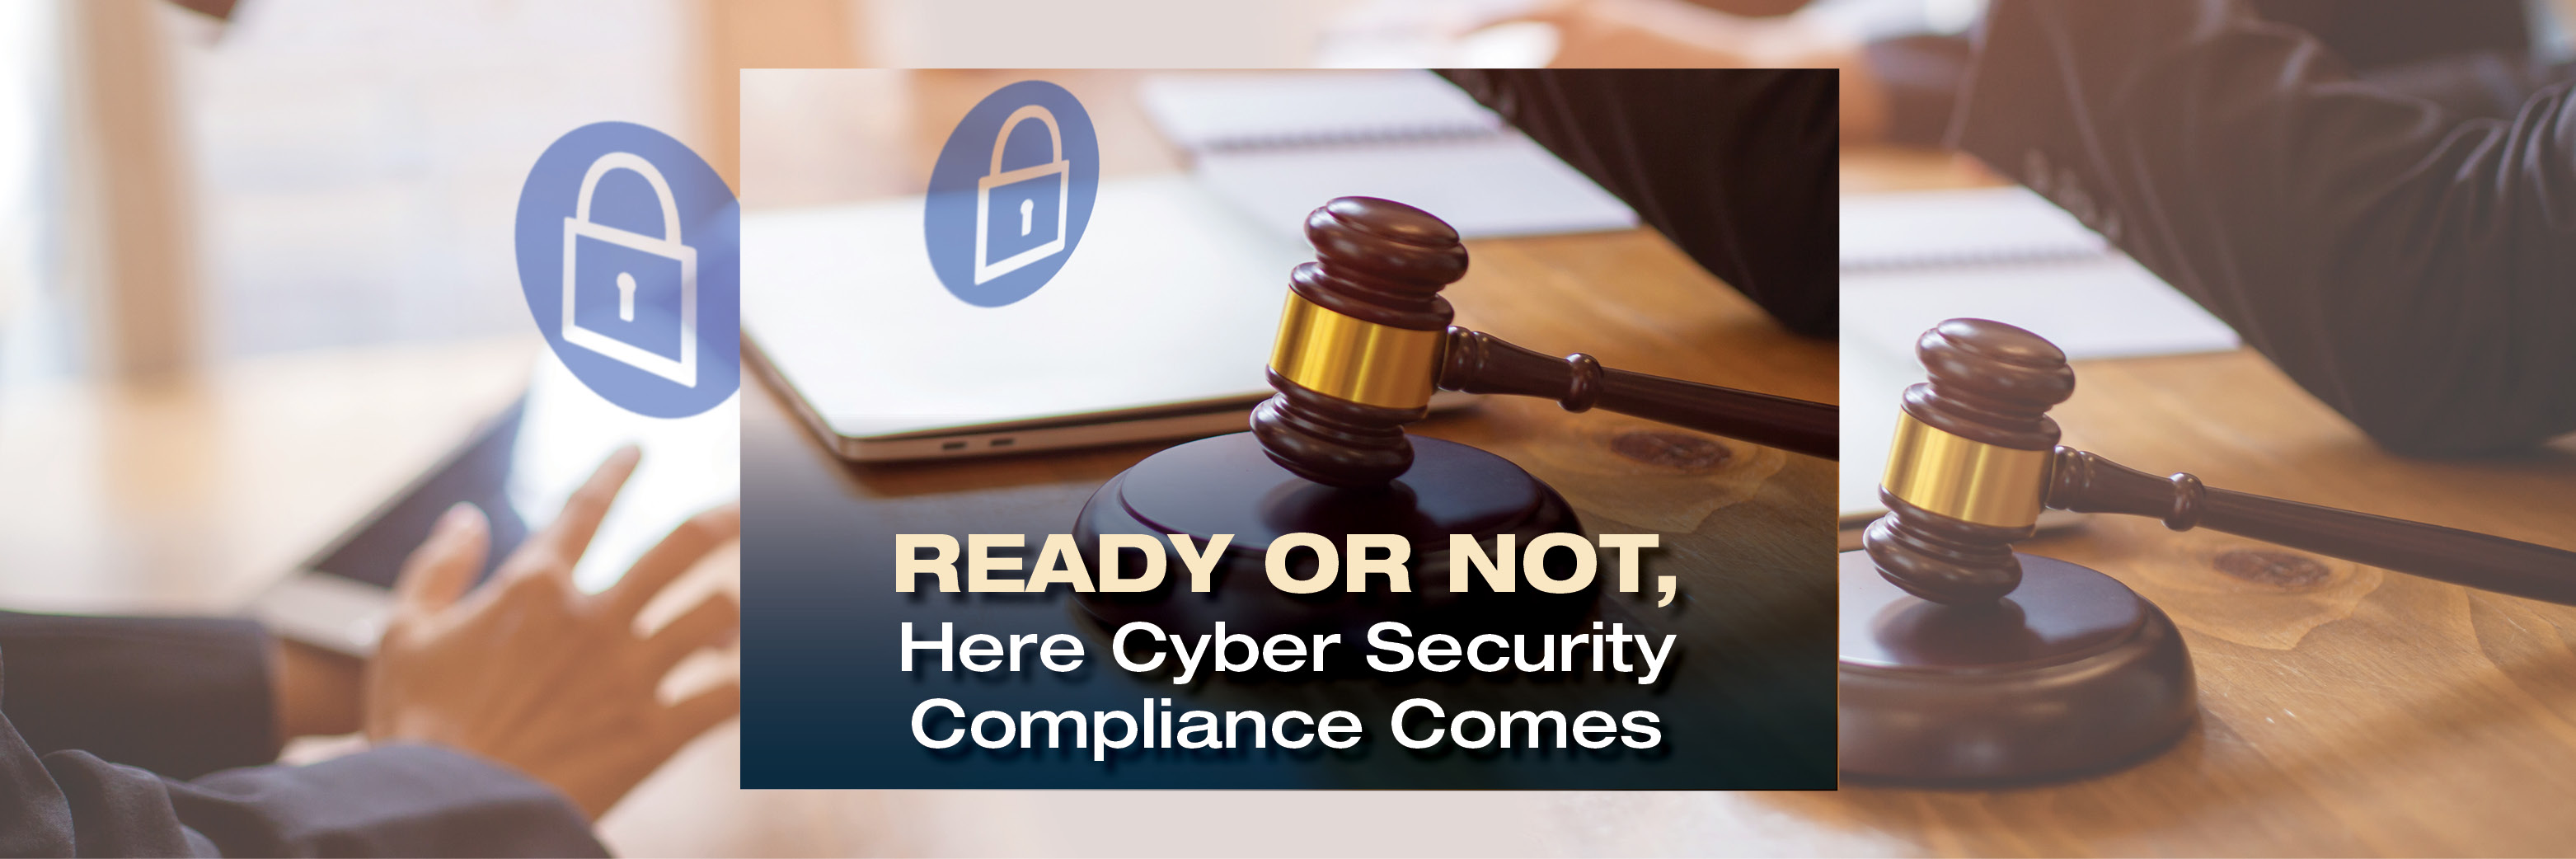 Ready or Not, Here Cyber Security Compliance Comes